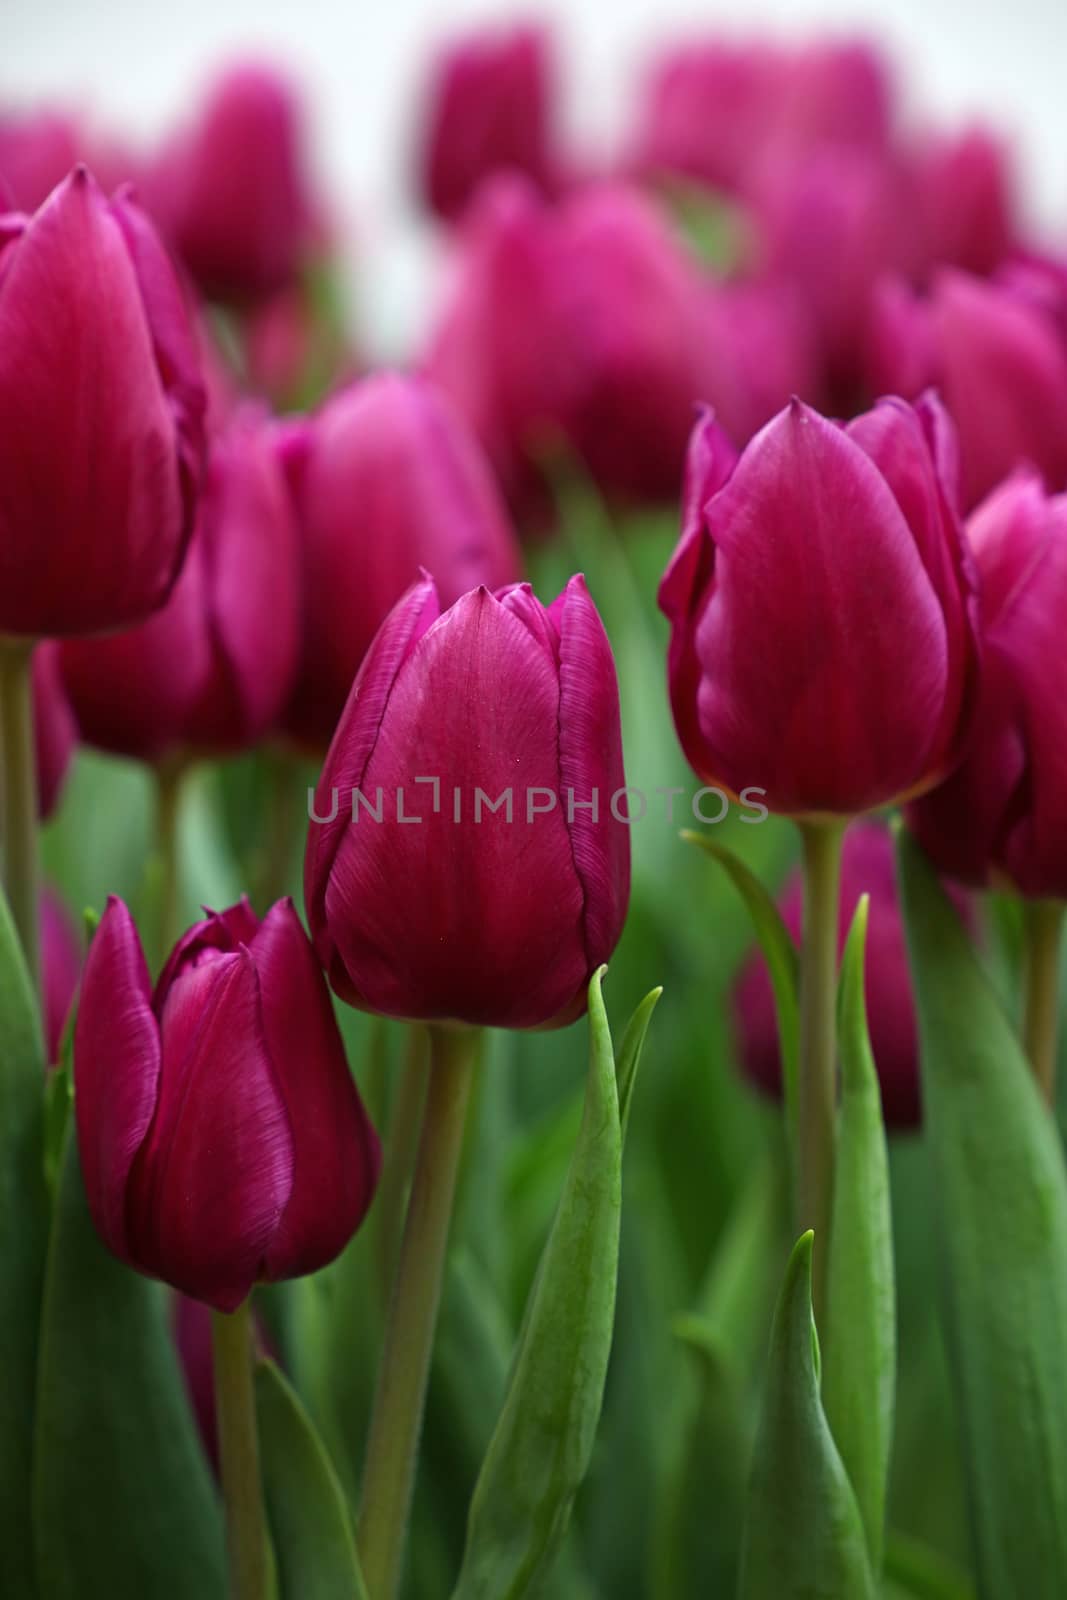 Purple fresh springtime tulip flowers with green leaves growing in field, close up, low angle view